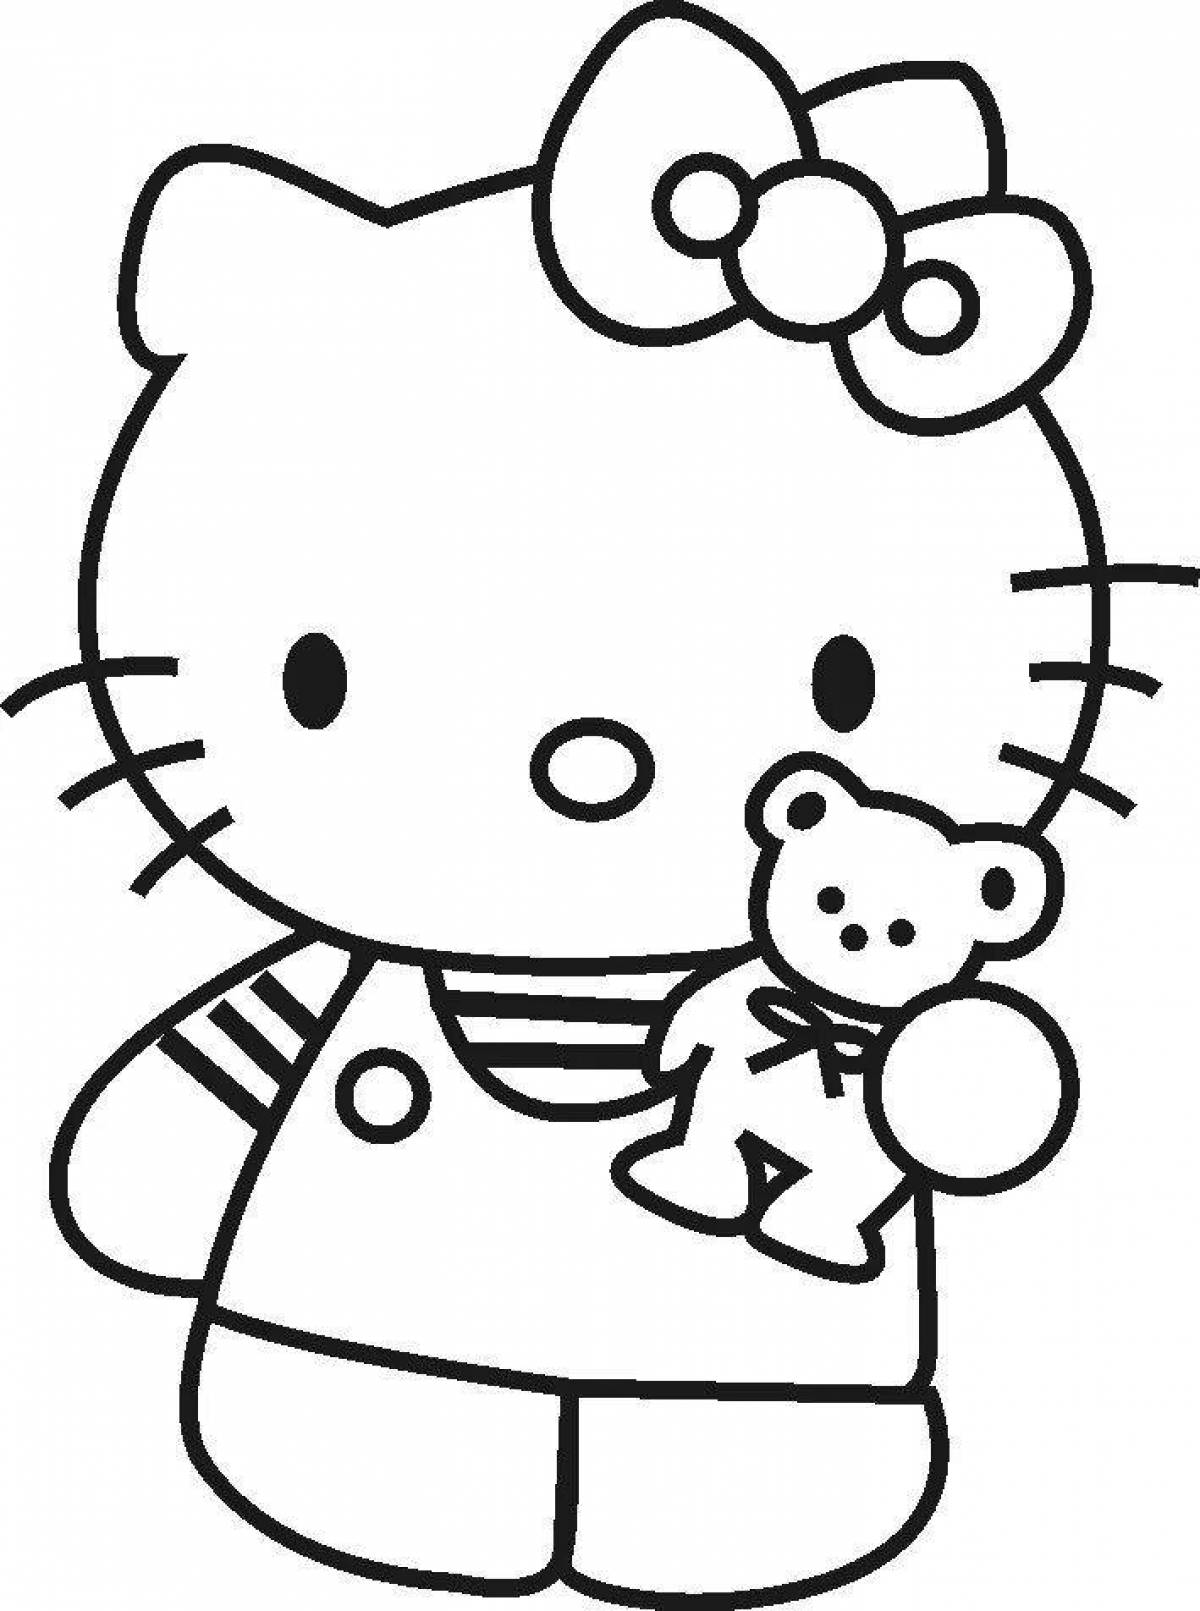 Great coloring hello kitty